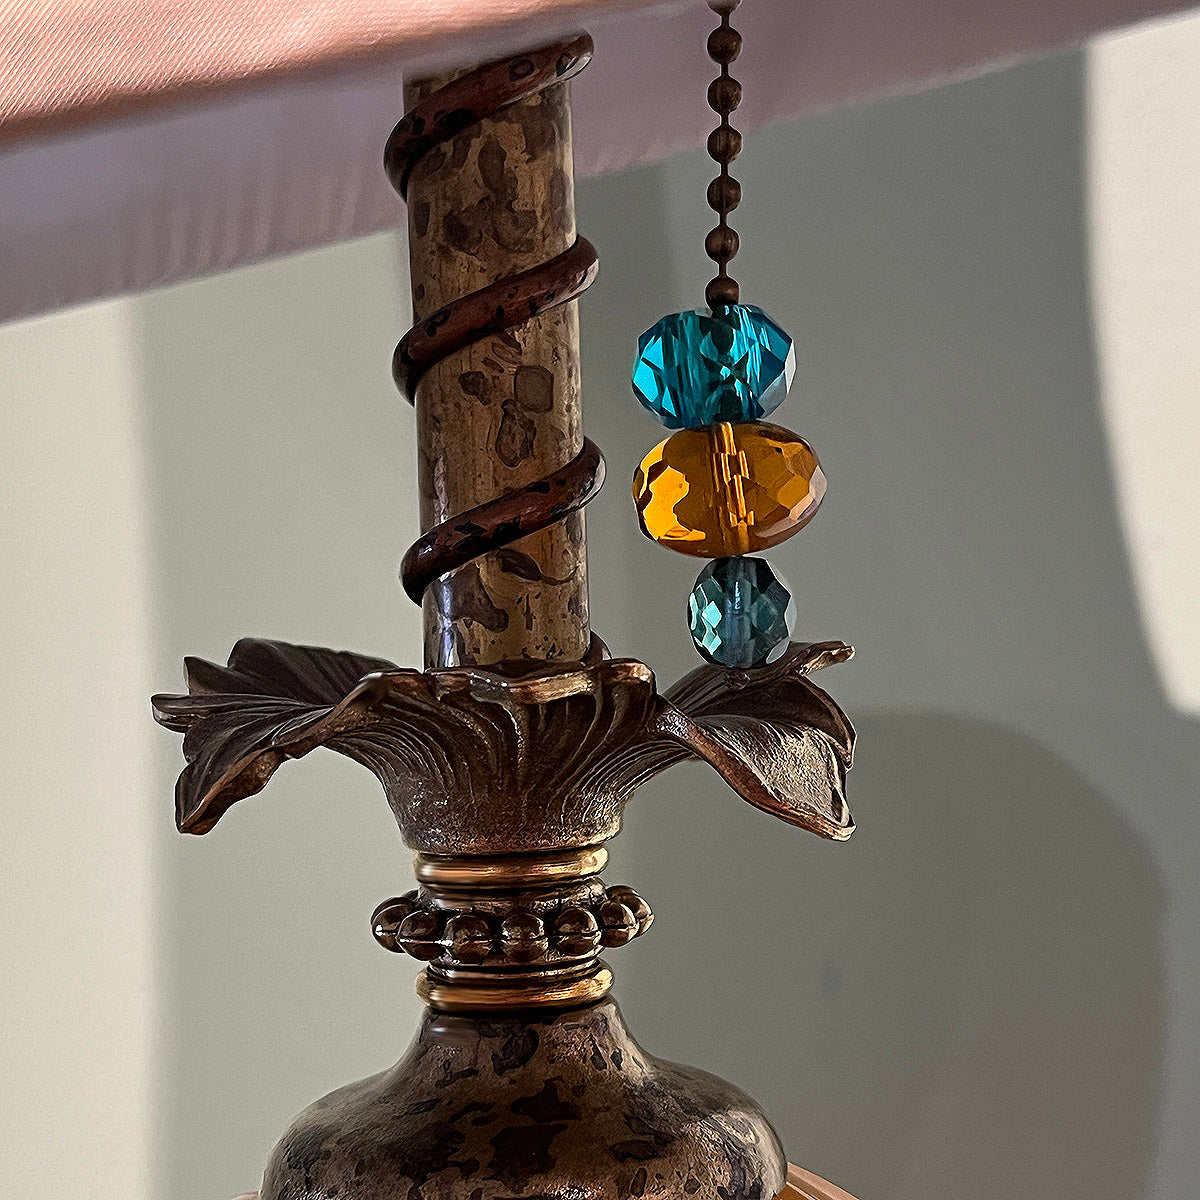 opaque blown glass and coiled copper around the neck of the lamp.